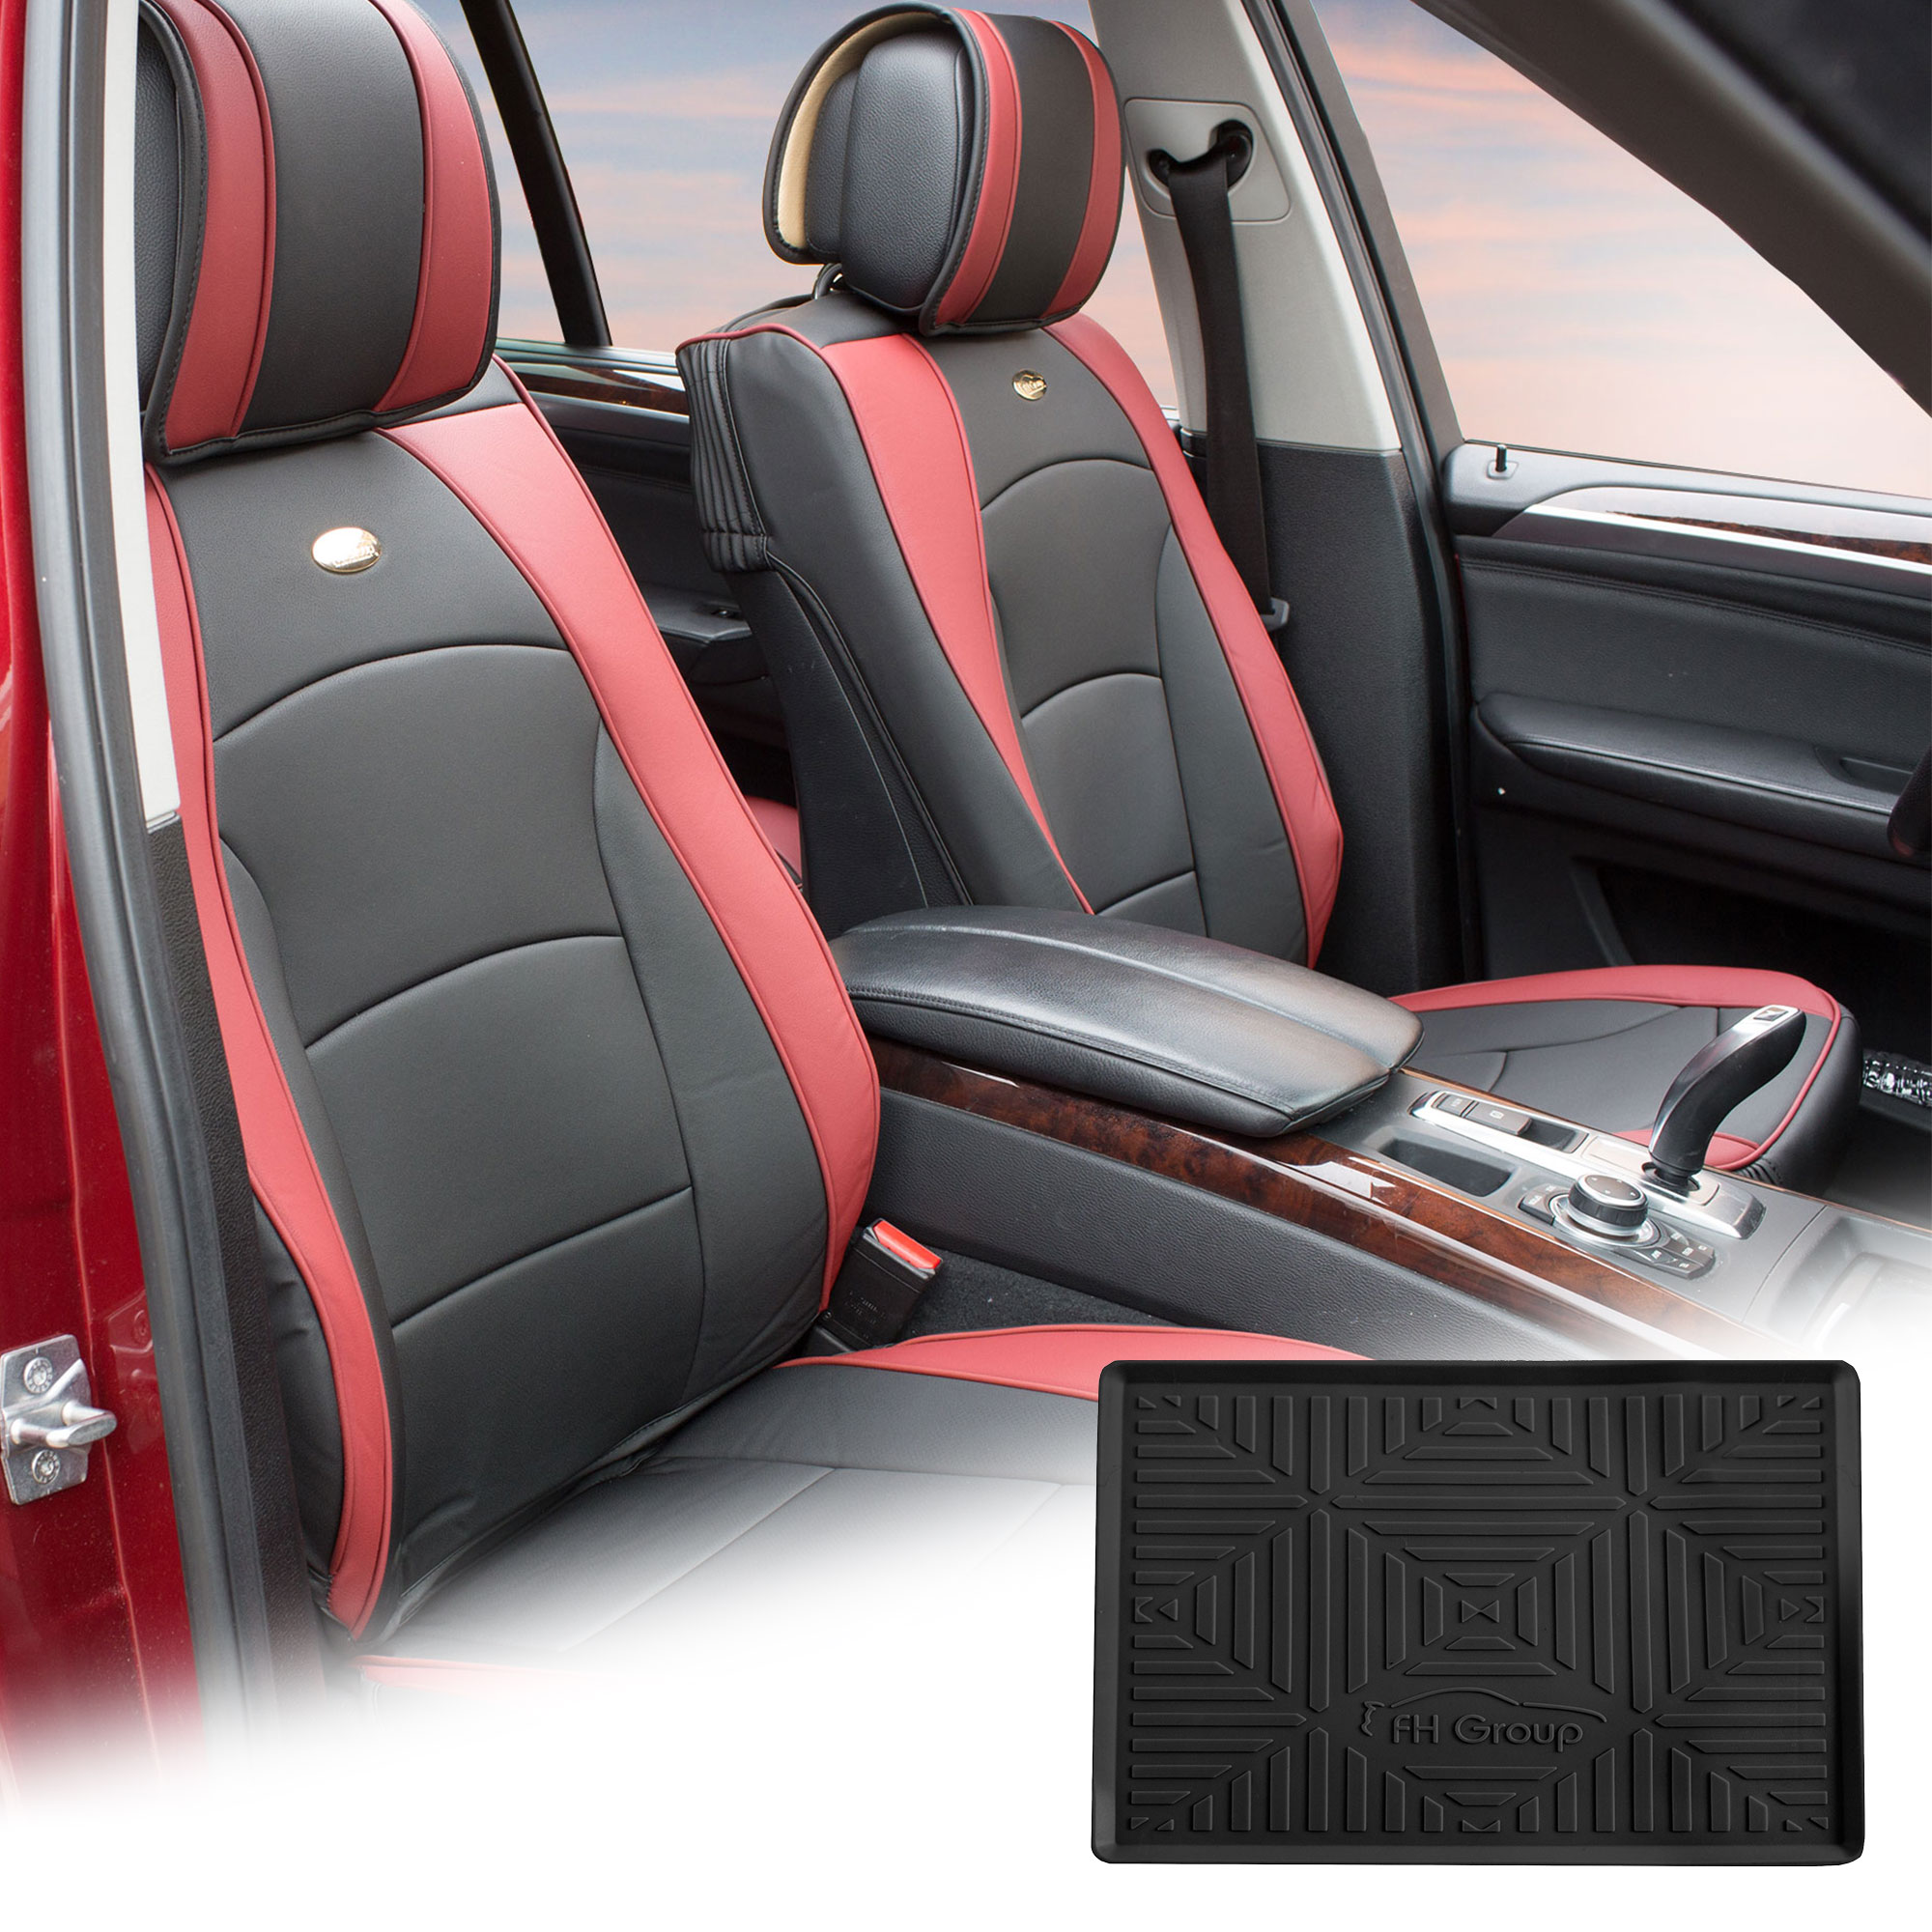 FH Group Burgundy Black Leatherette Front Bucket Seat Cushion Covers for Auto Car SUV Truck Van with Black Dash Mat